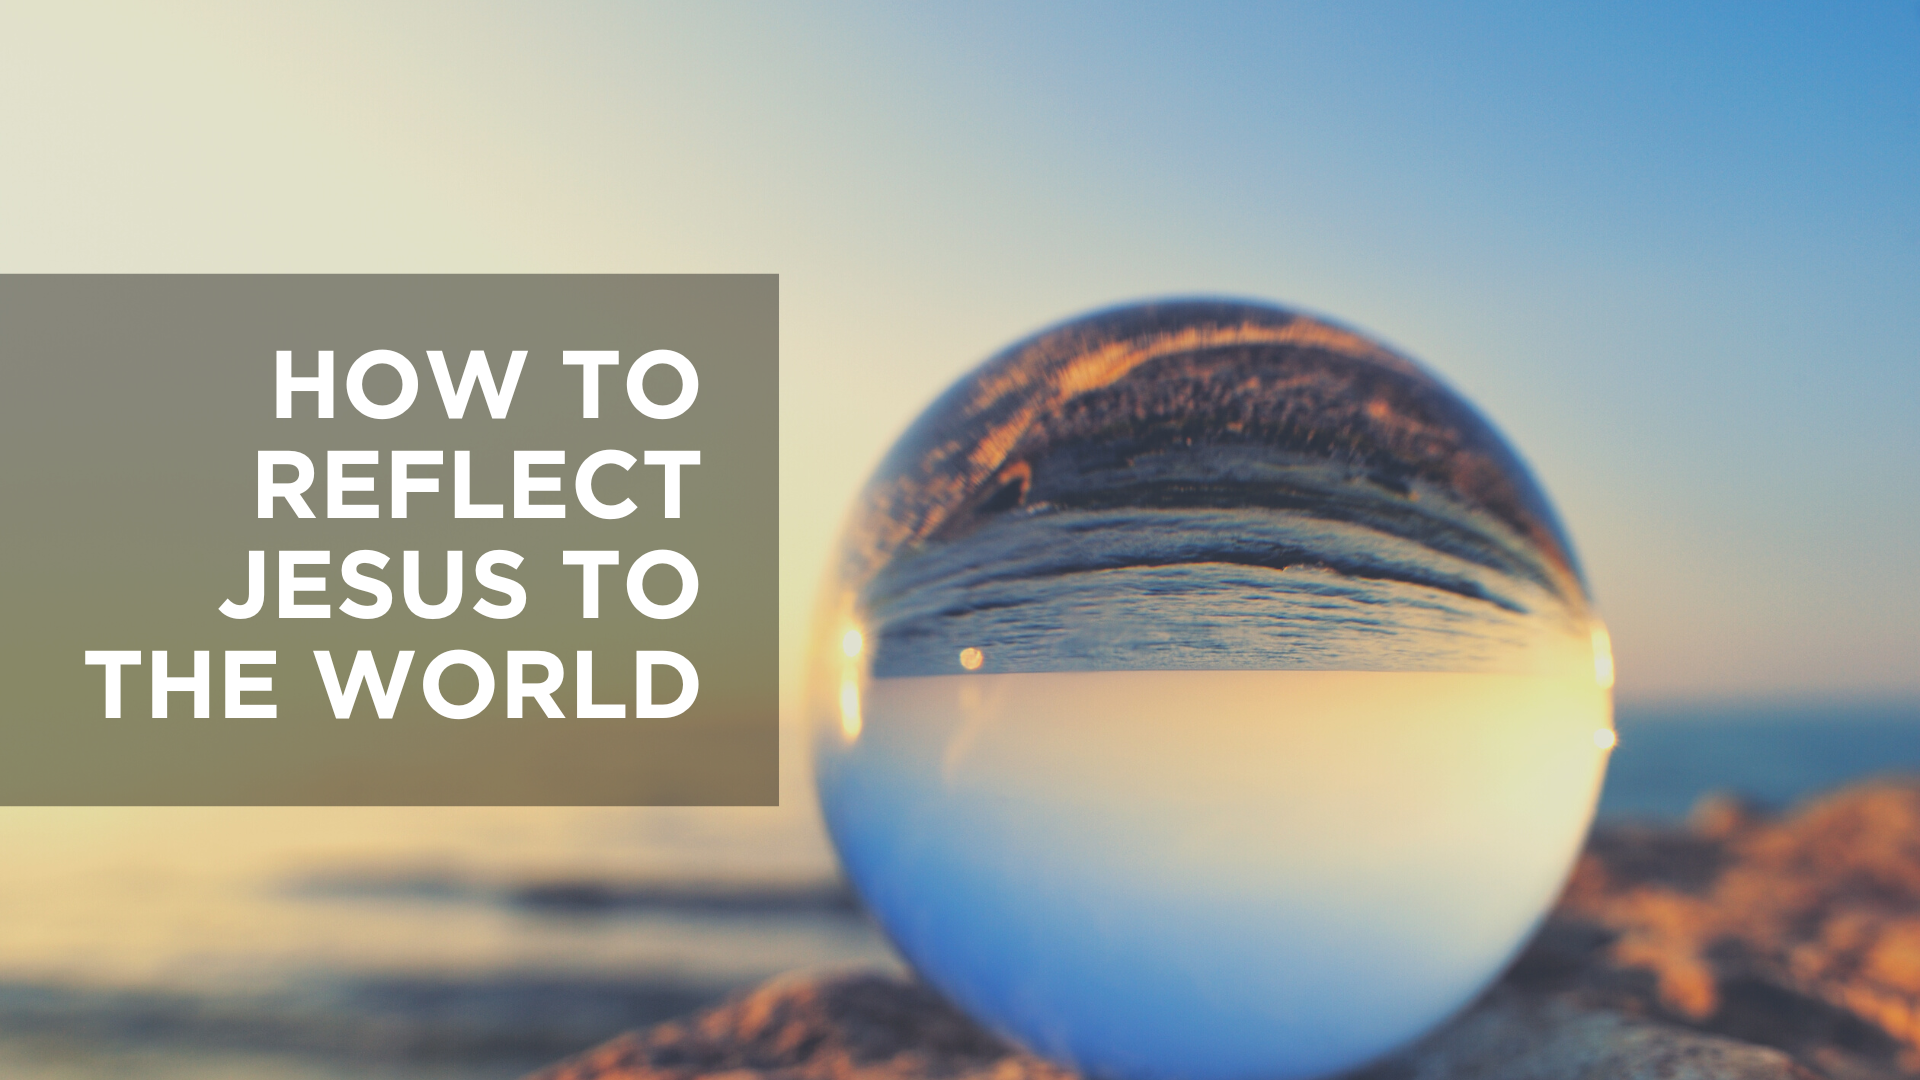 How to Reflect Jesus to the World